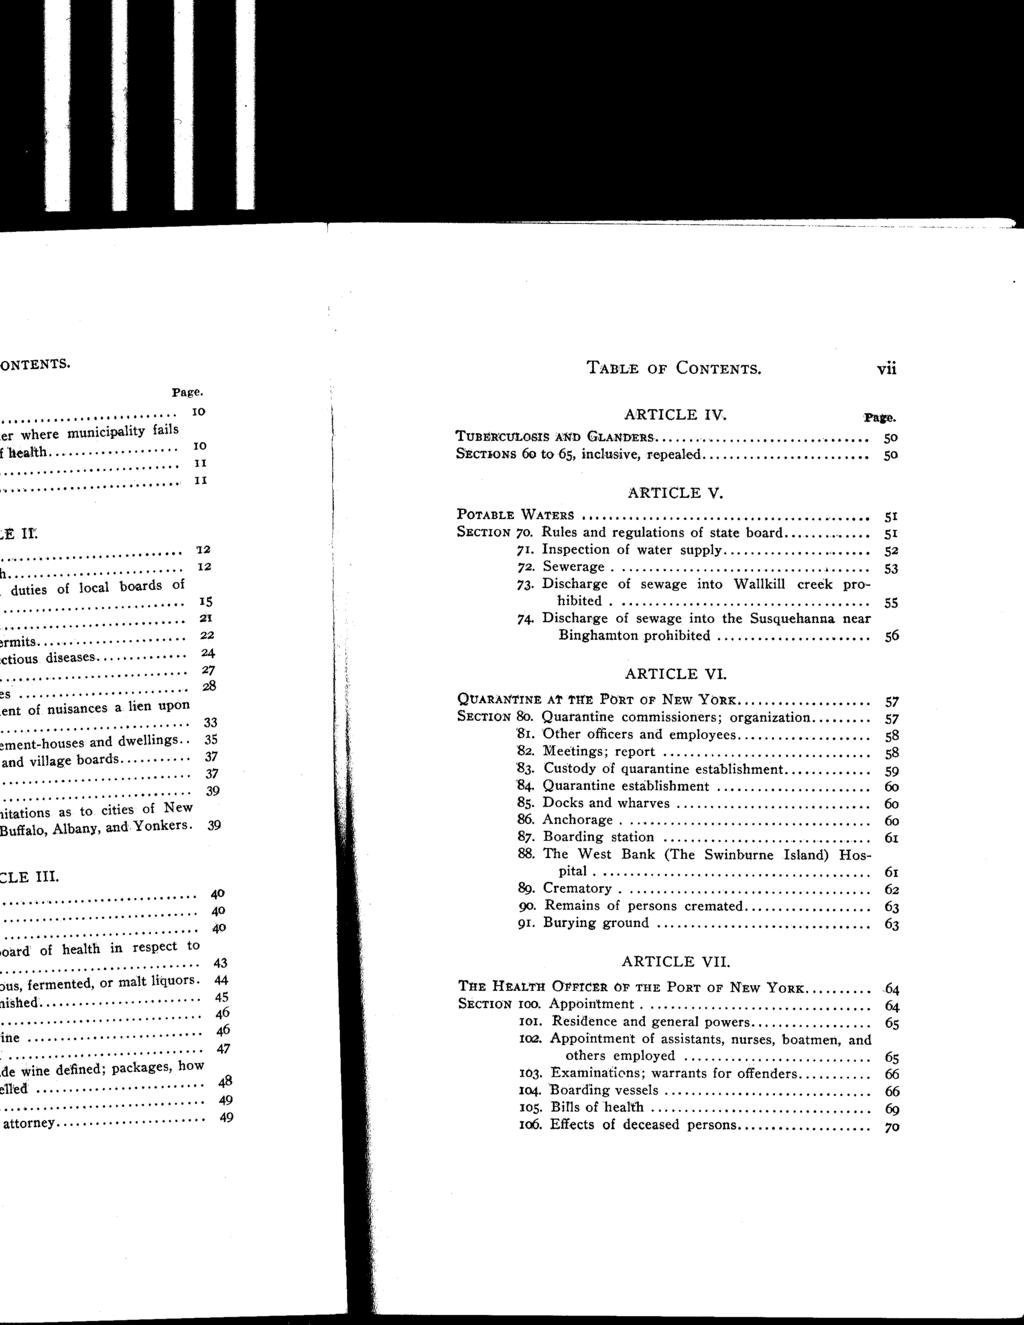 TABLE OF CONTENTS. Vii ARTICLE IV. page. TUBERCULOSIS AND GLA.NDRRS 50 SECTIONS 6o to 65, inclusive, repealed 50 ARTICLE V. POTABLE WATERS 51 SECTION 70. Rules and regulations of state board 51 71.